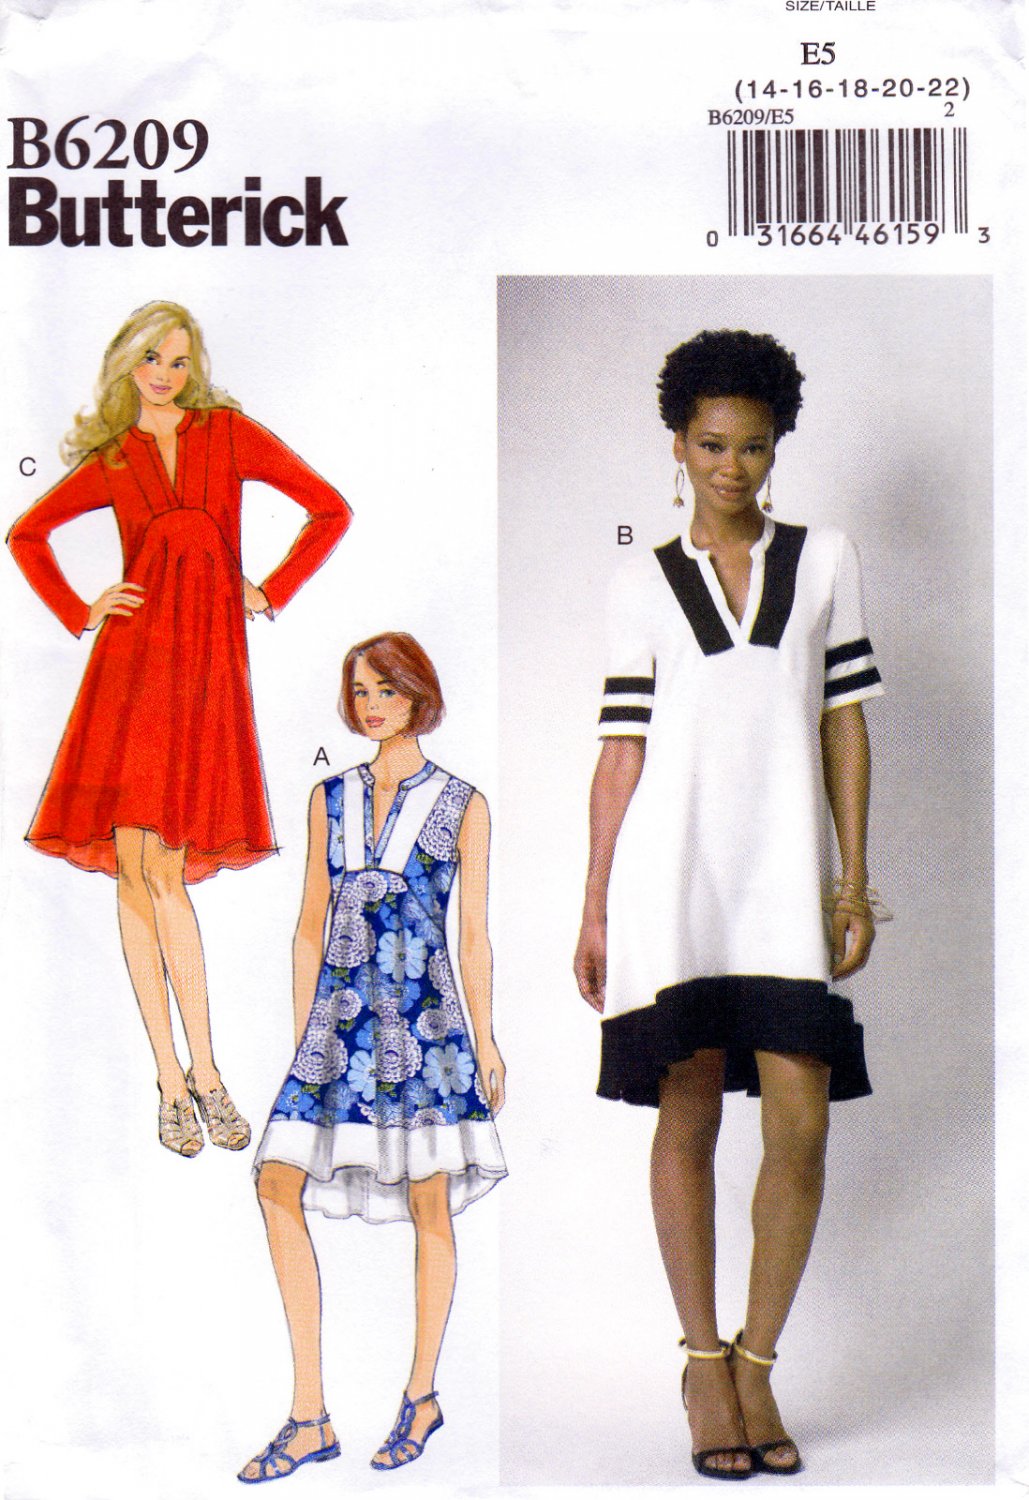 Butterick B6209 6209 Womens Misses Pullover Dress Sewing Pattern Slit Neck Sizes 14-16-18-20-22